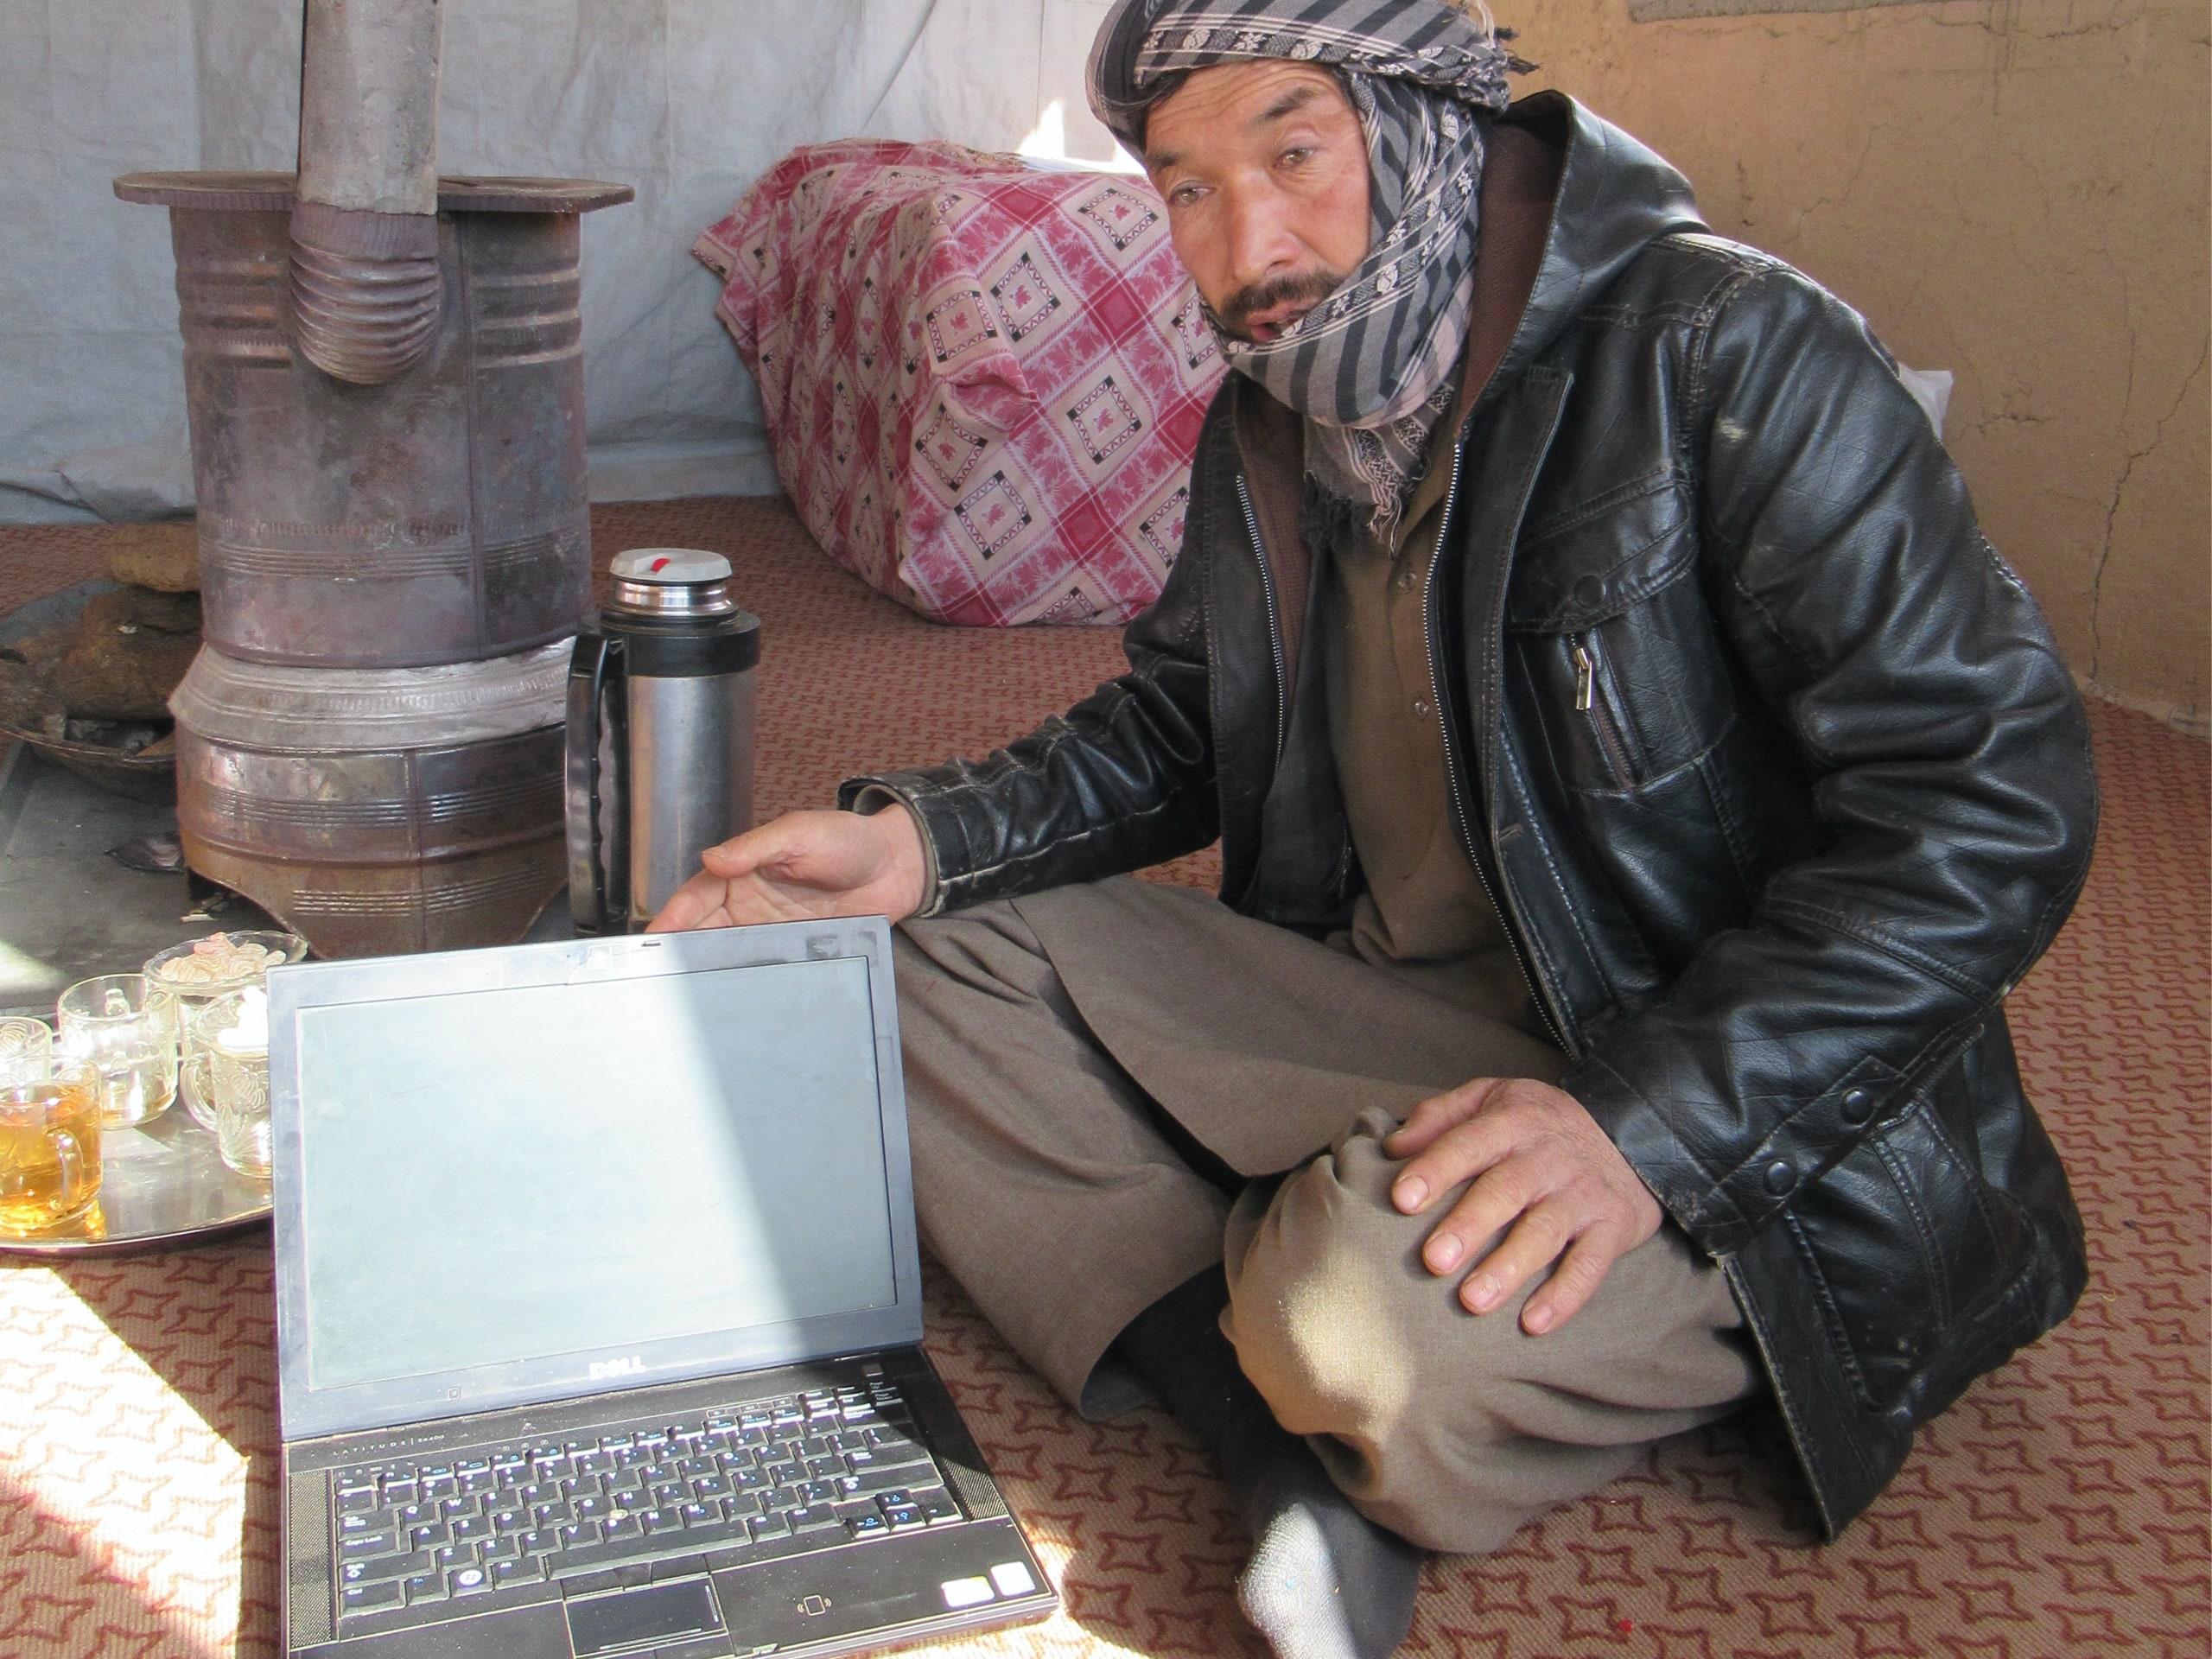 Making use of a laptop changed this man’s life.